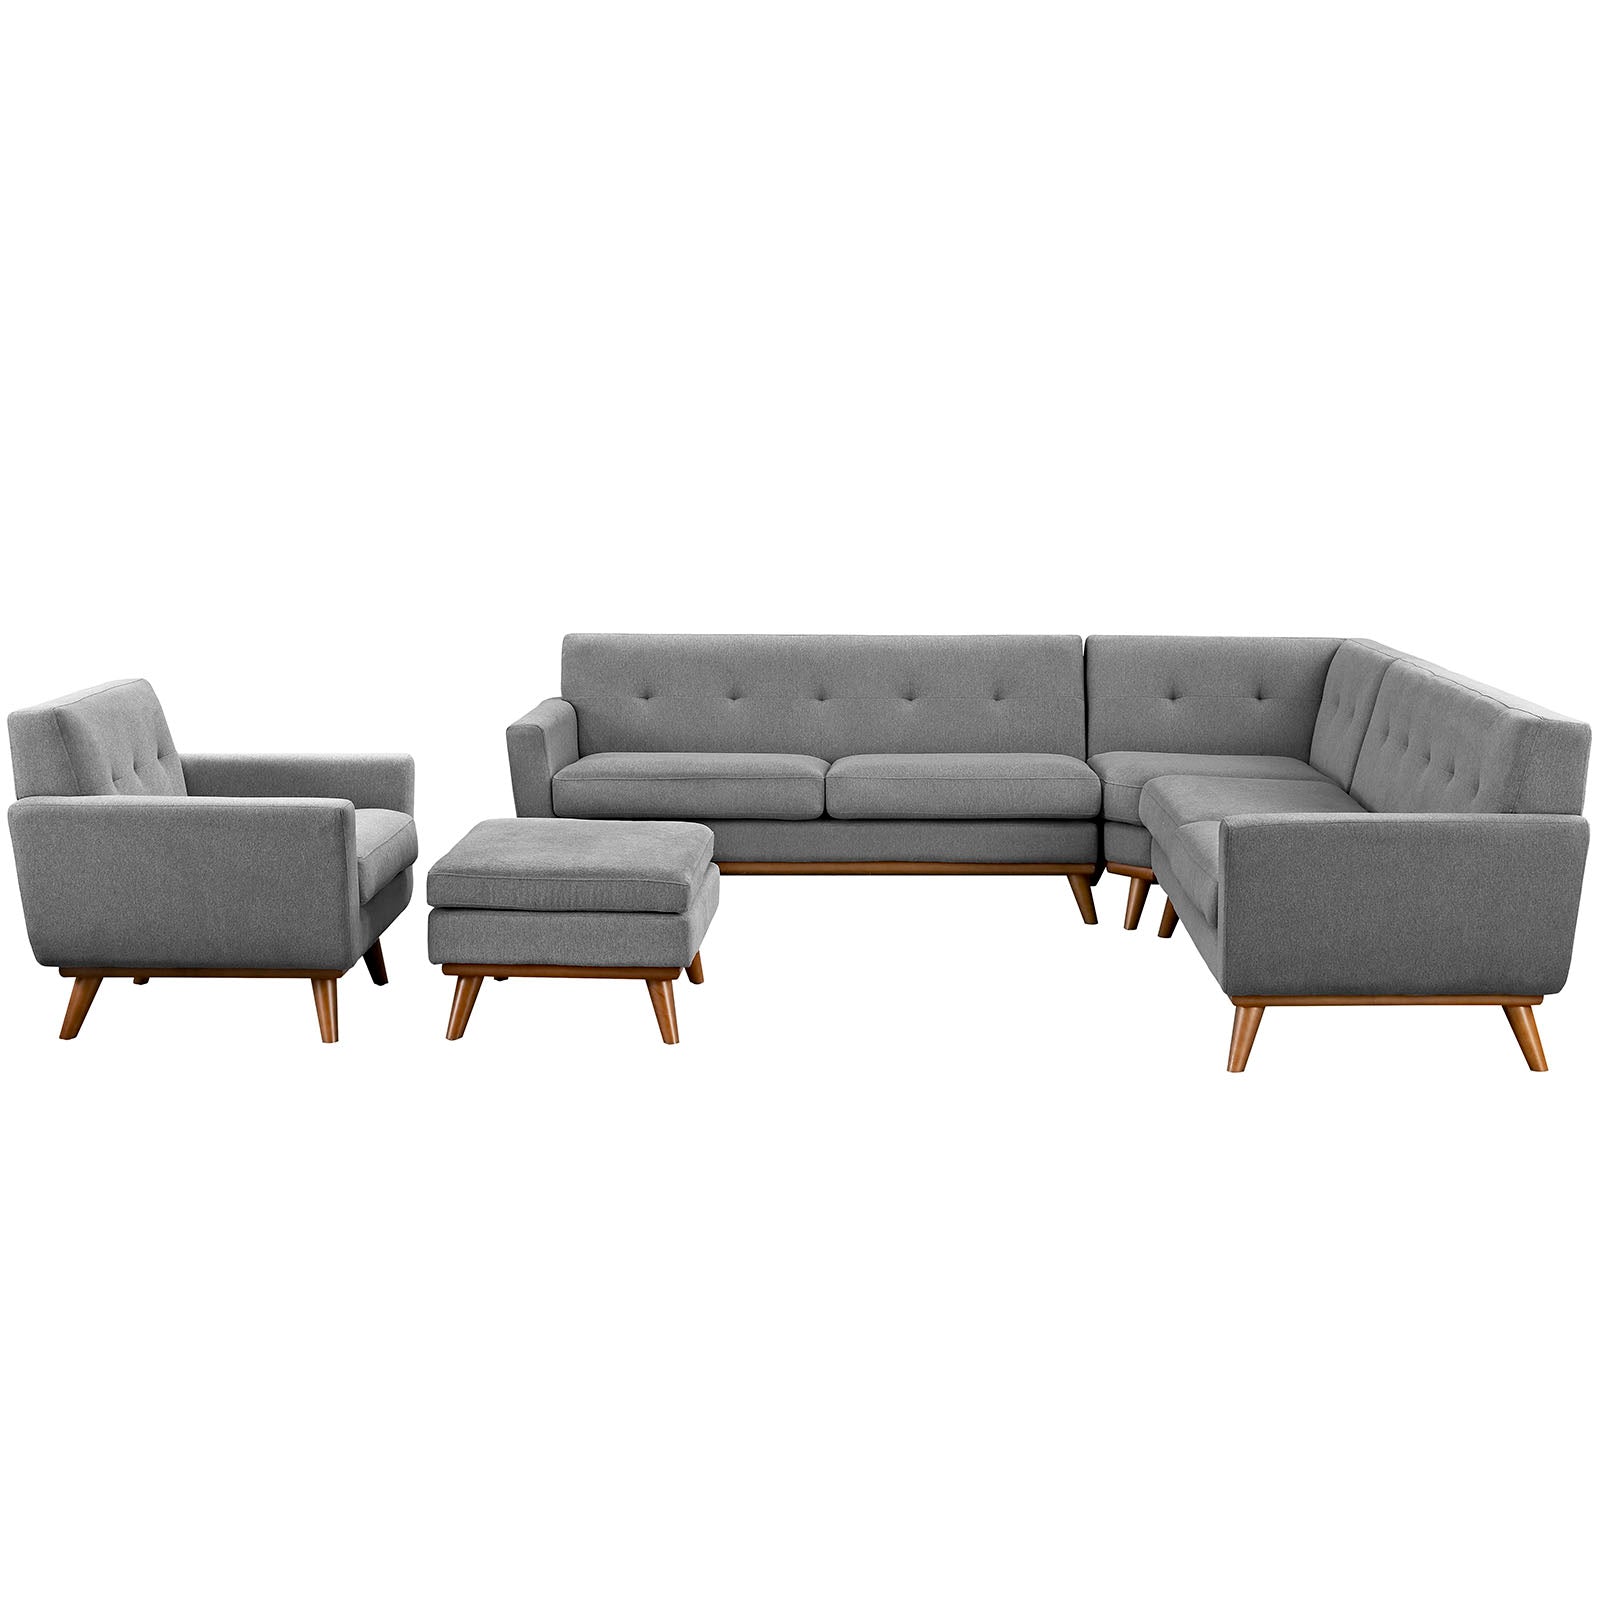 Modway Sectional Sofas - Engage-5-Piece-Sectional-Sofa-Expectation-Gray